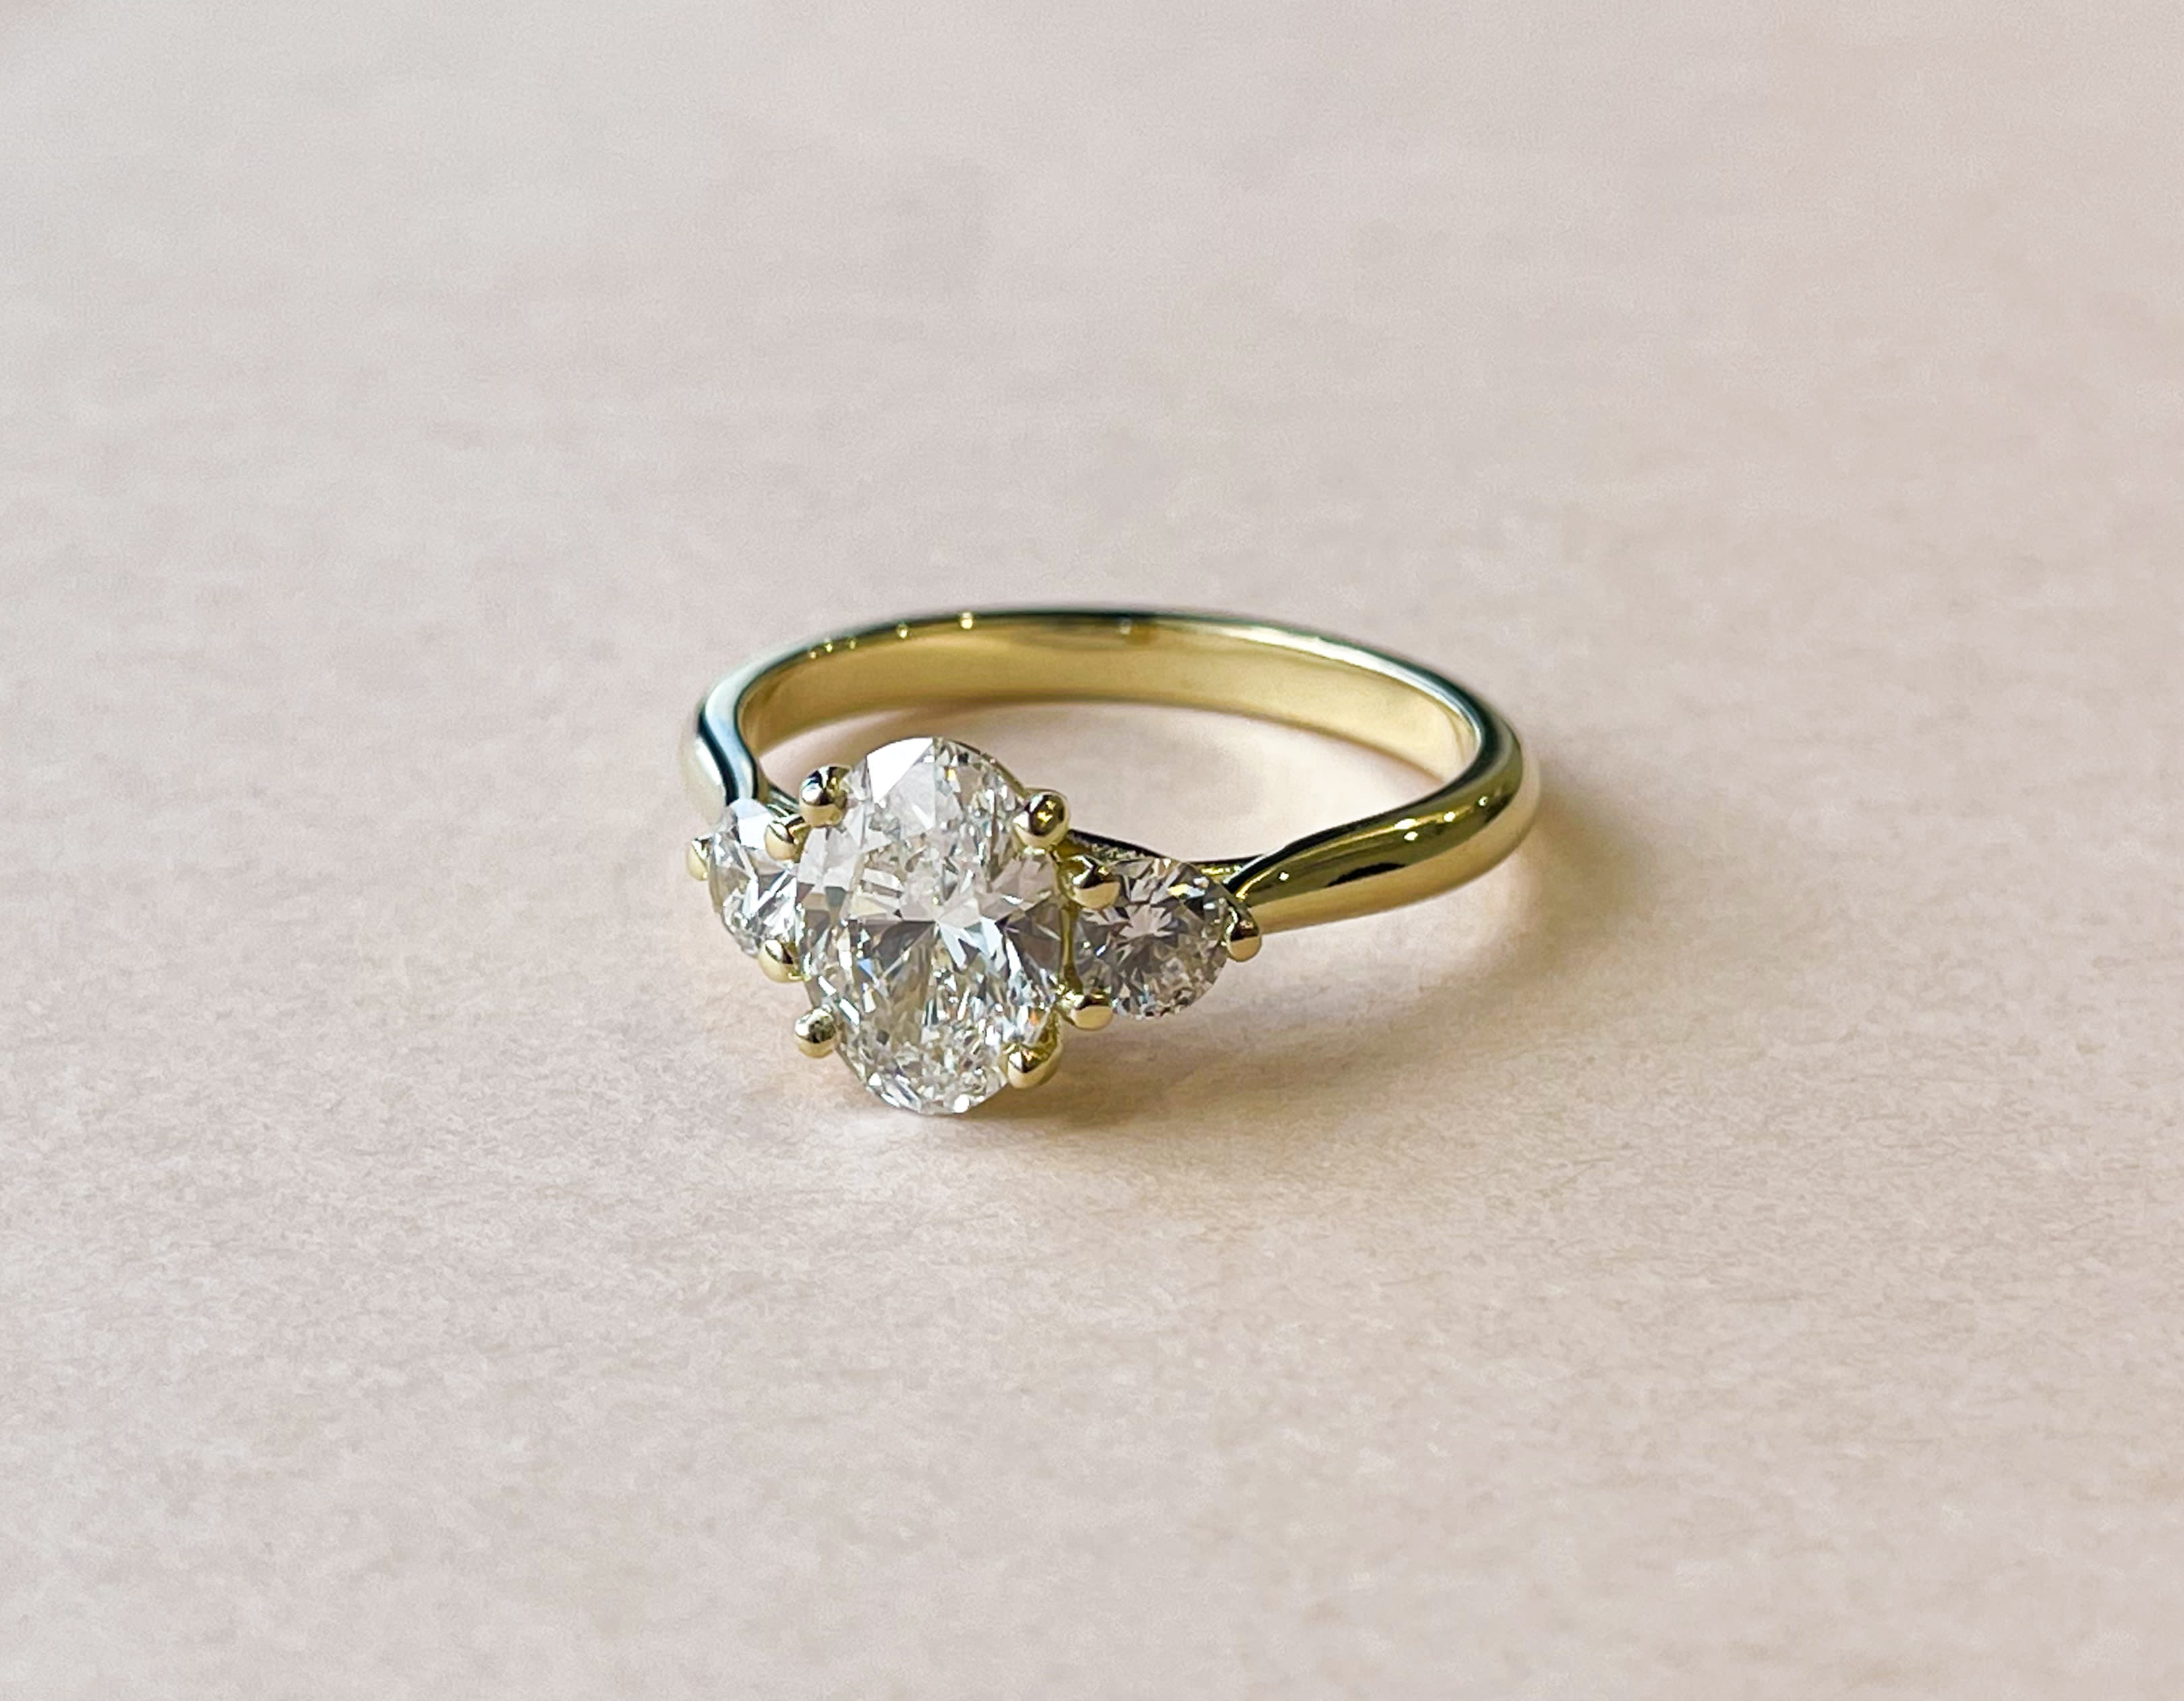 1.5 carat oval cut centre stone with two round accent diamonds.